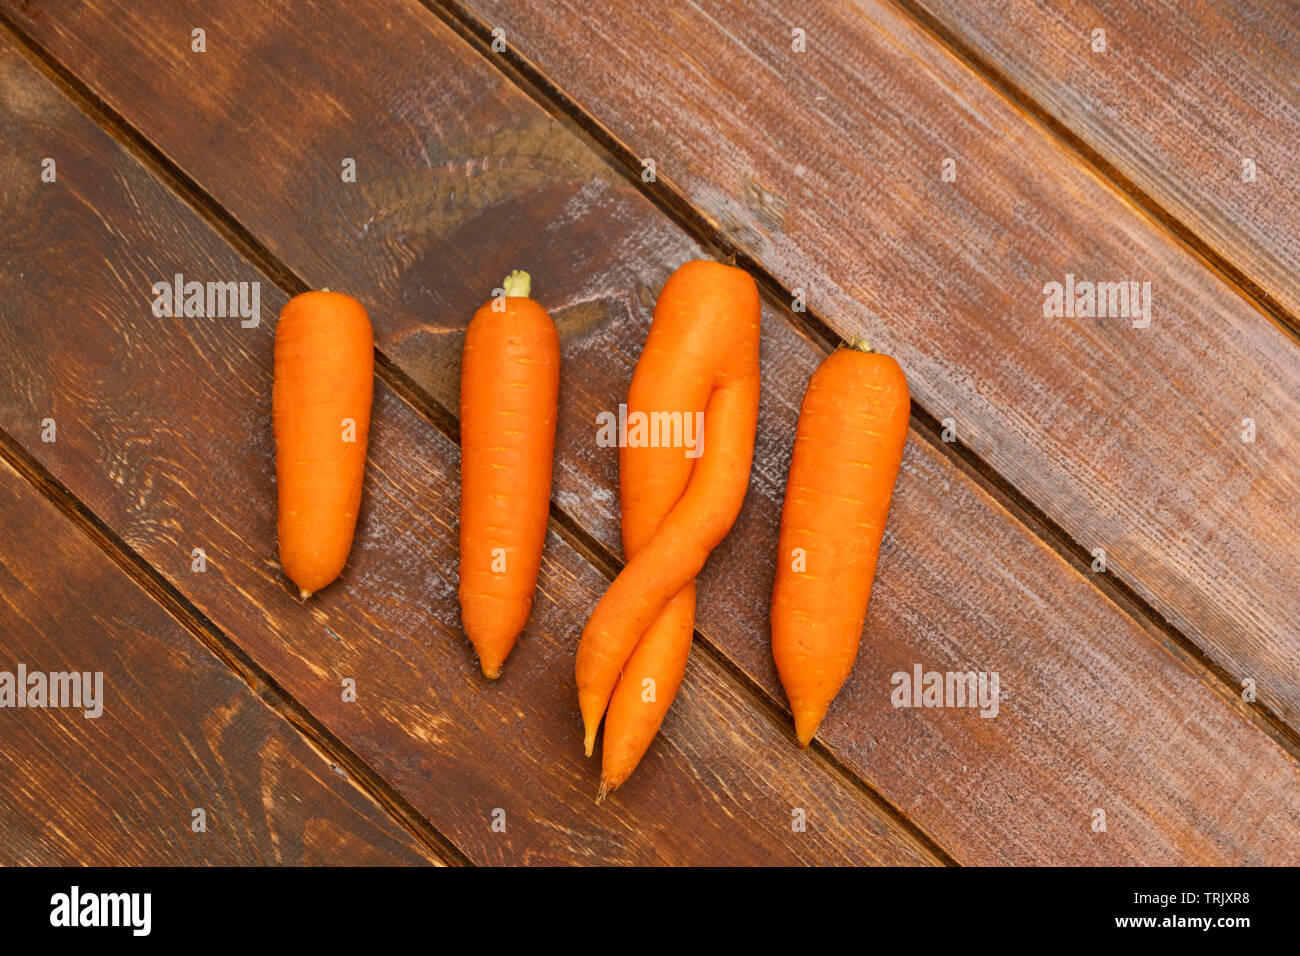 One ugly organic carrot among other normal carrots on wooden background. Zero waste concept. Stock Photo